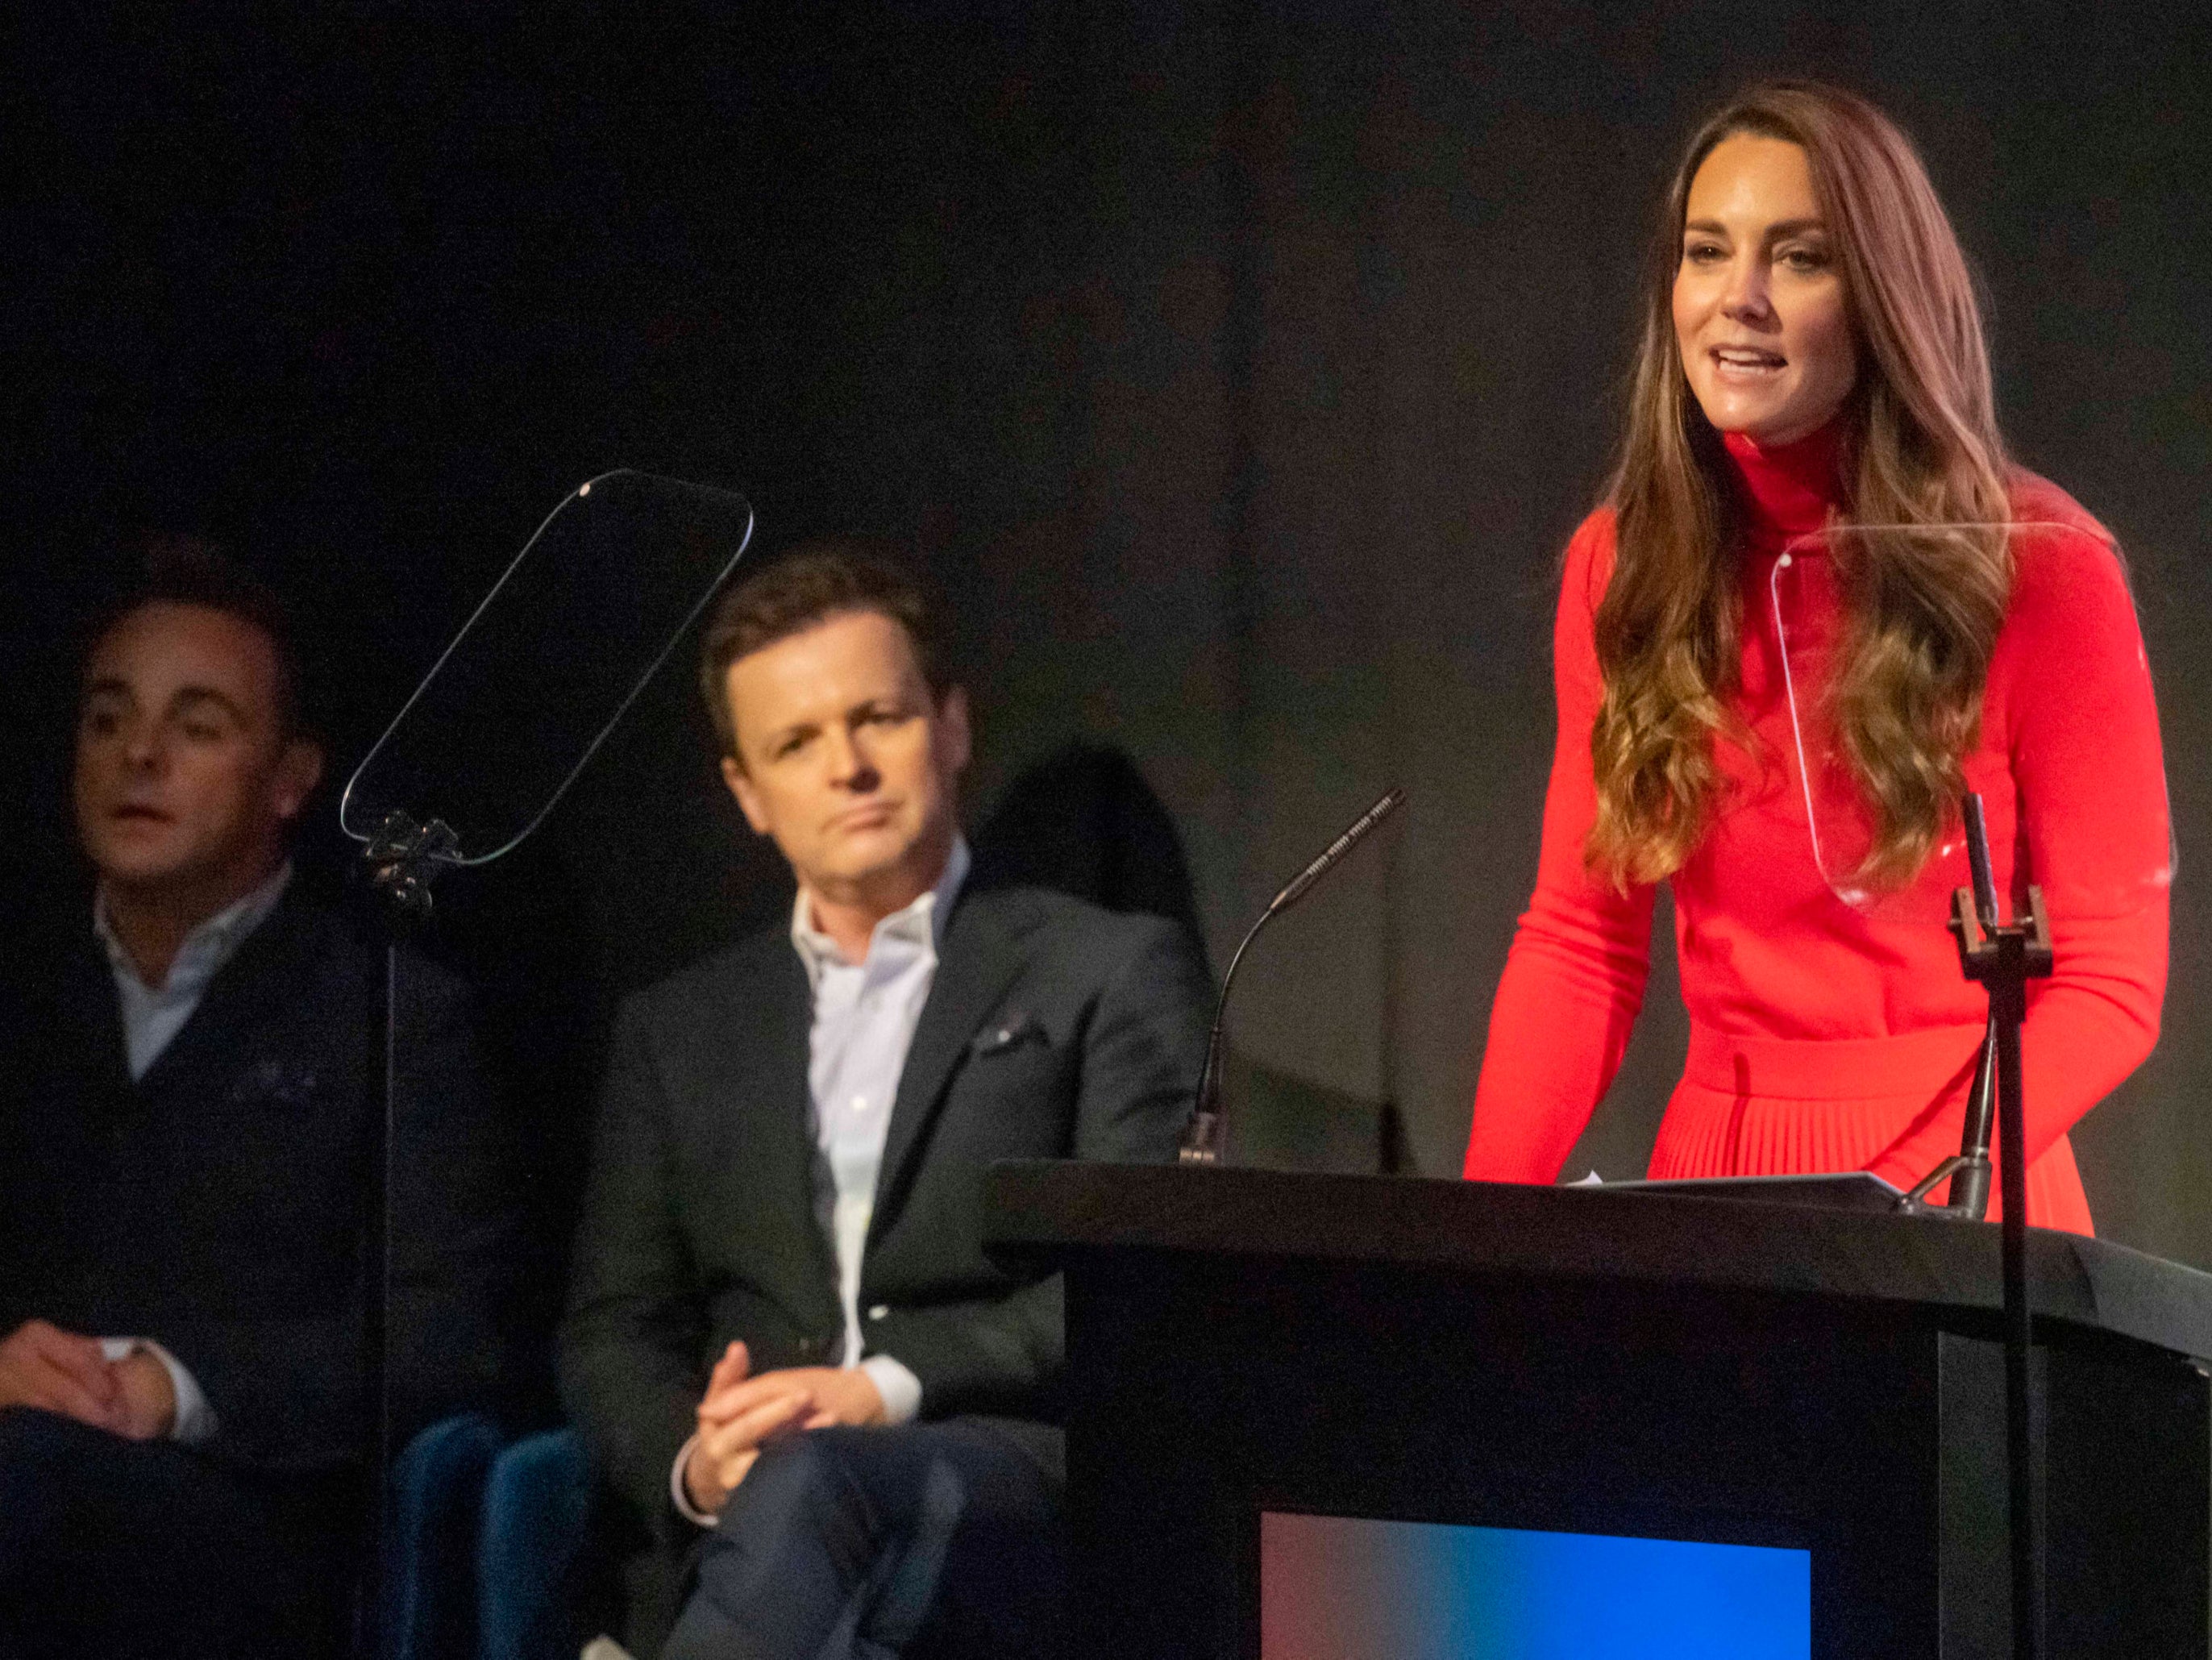 The Duchess of Cambridge delivers the keynote speech, watched by television presenters Ant McPartlin and Declan Donnelly, at the launch of the Forward Trust’s Taking Action on Addiction campaign at BAFTA, London